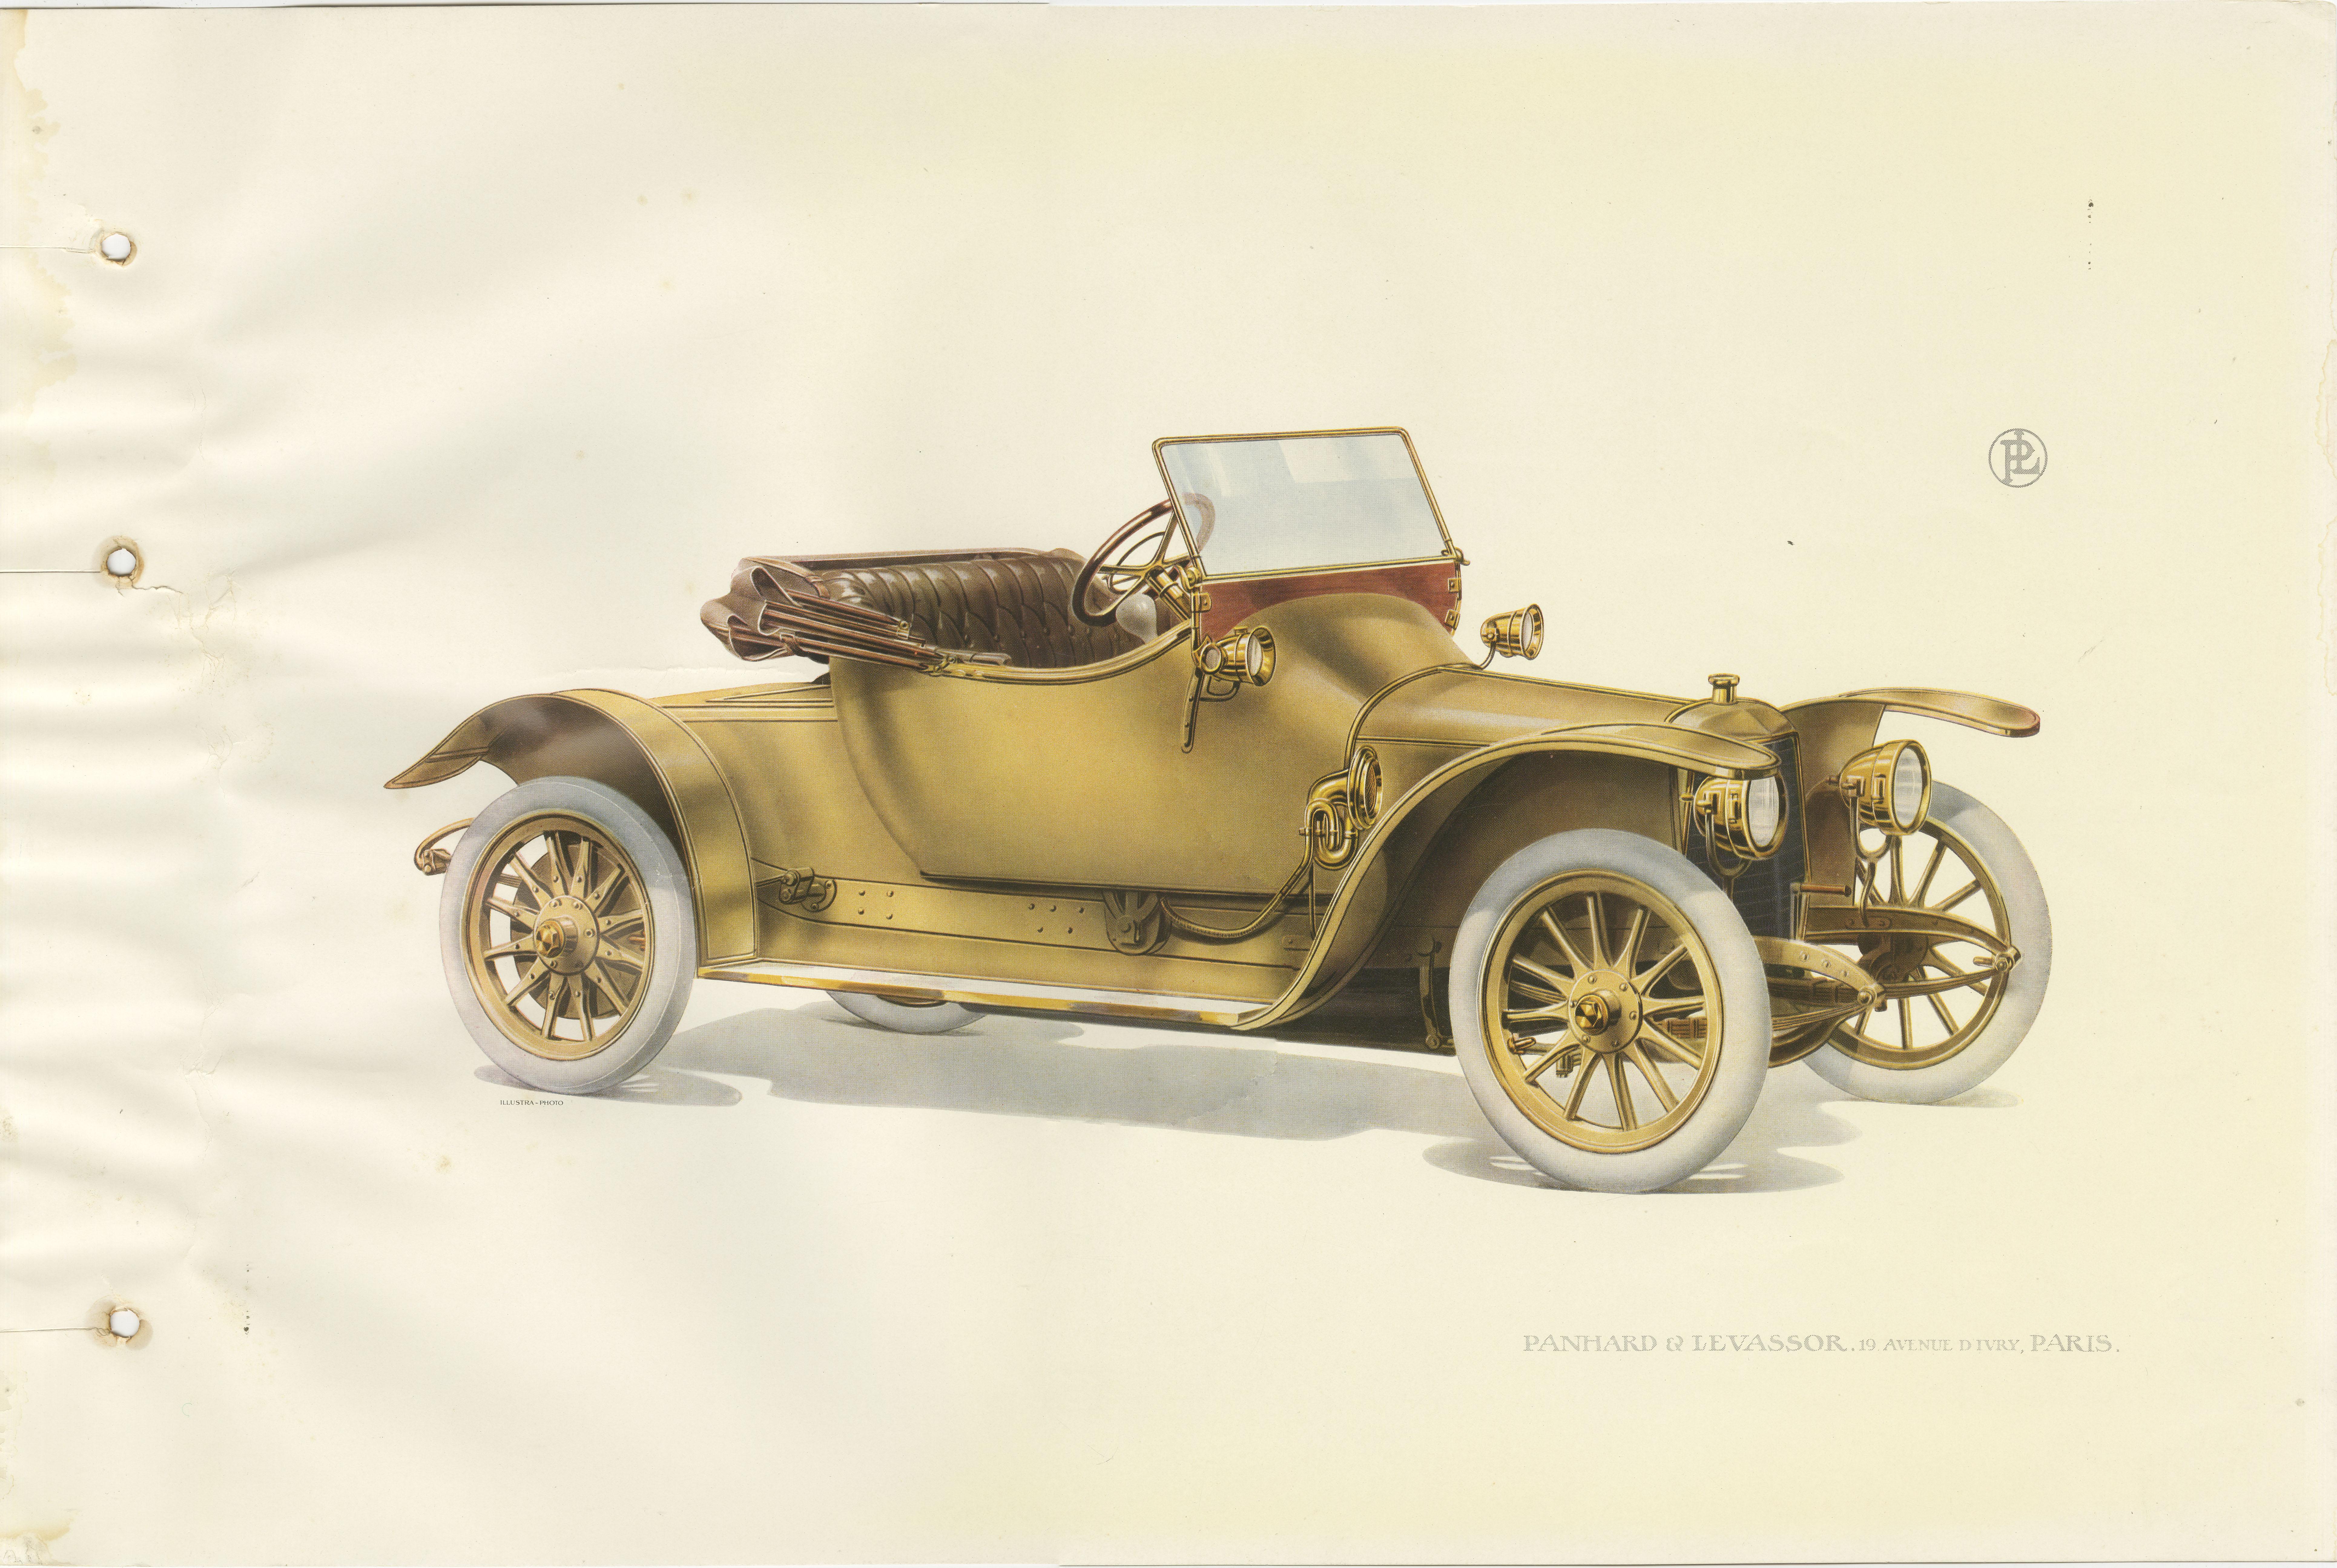 Antique print of a Panhard et Levassor deux baquets car. This print originates from a rare catalog of the exclusive French brand Panhard & Levassor from 1914.

Panhard was a French motor vehicle manufacturer that began as one of the first makers